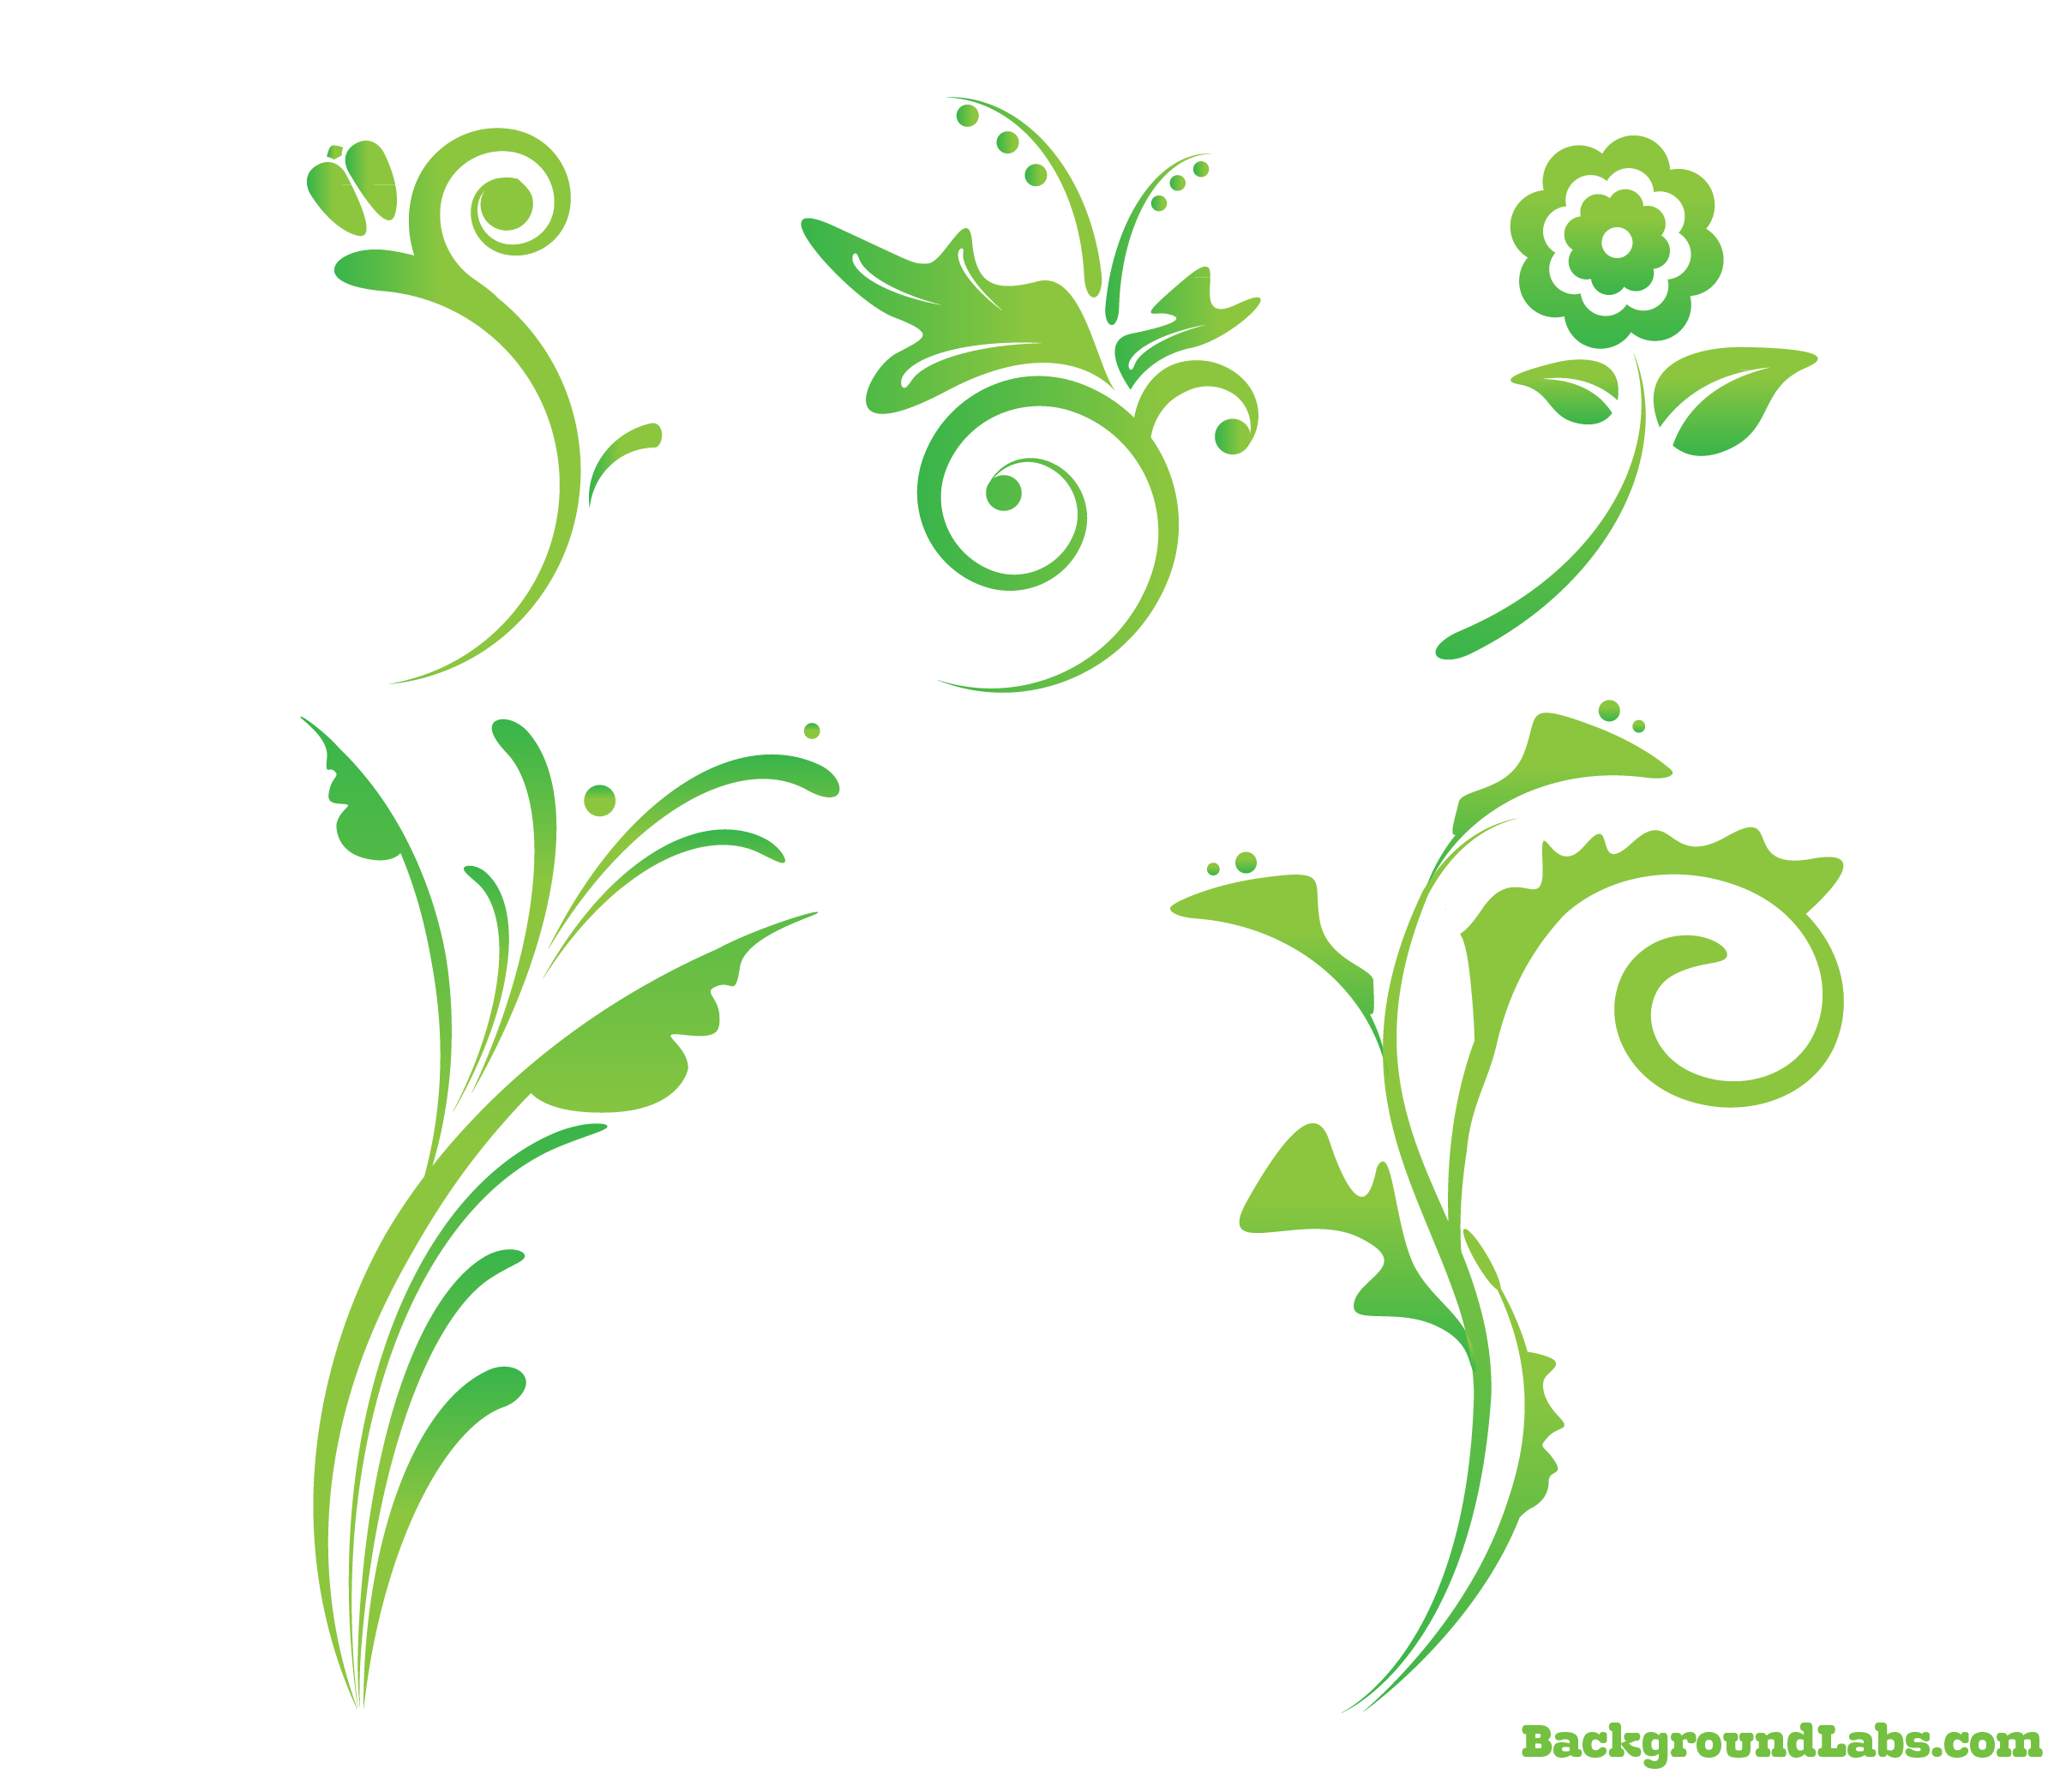 free vector clipart svg - photo #7